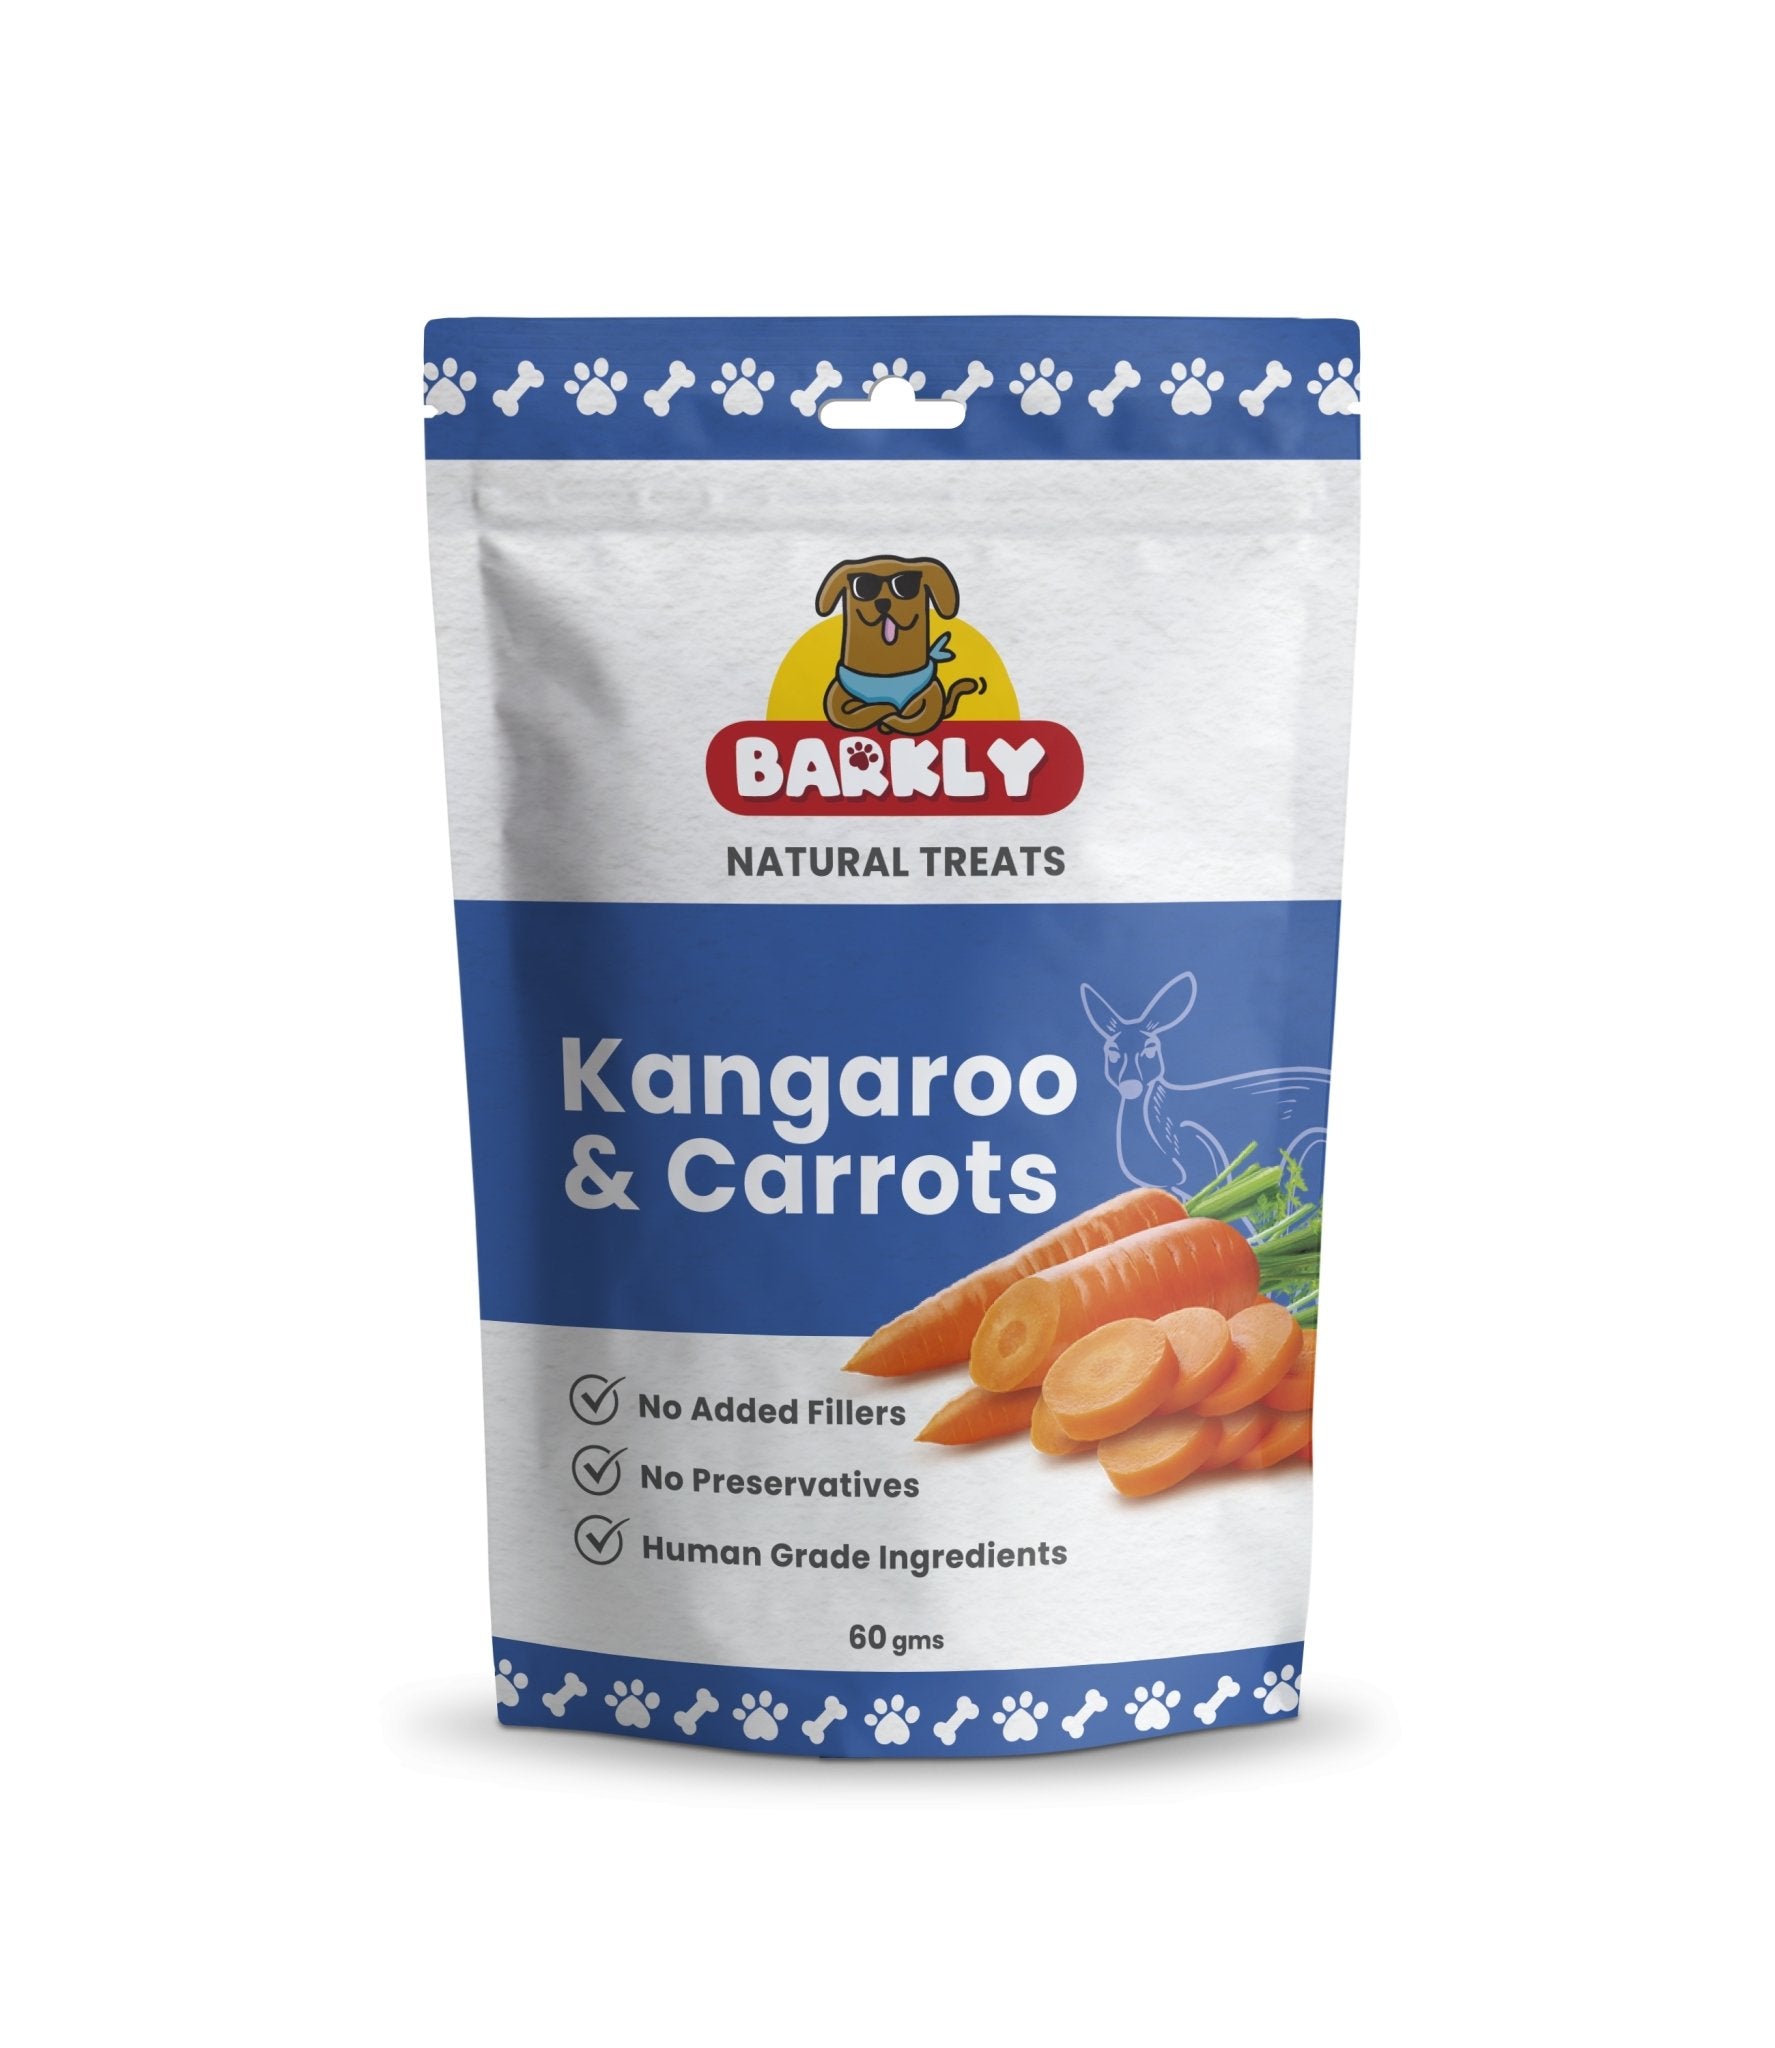 Kangaroo and carrot flavored dog treats in packaging